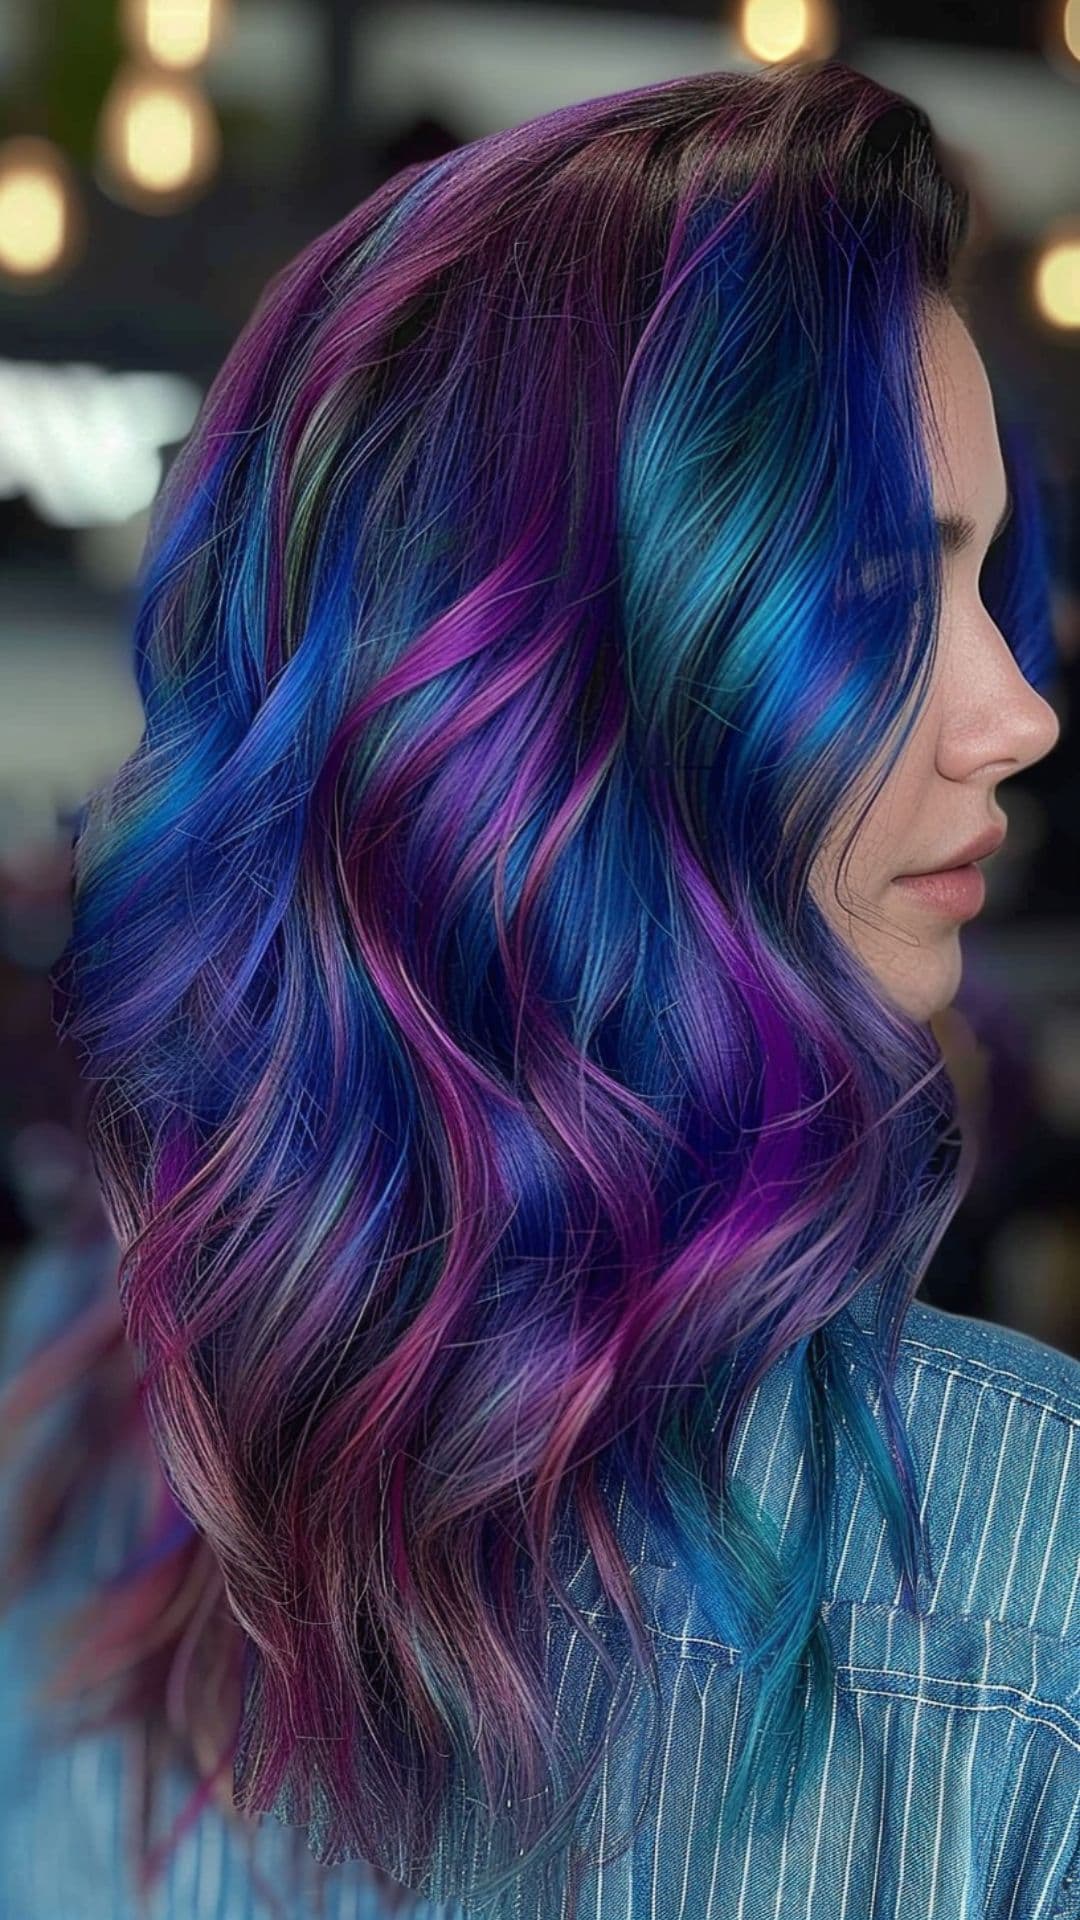 A woman modelling a psychedelic hair color.